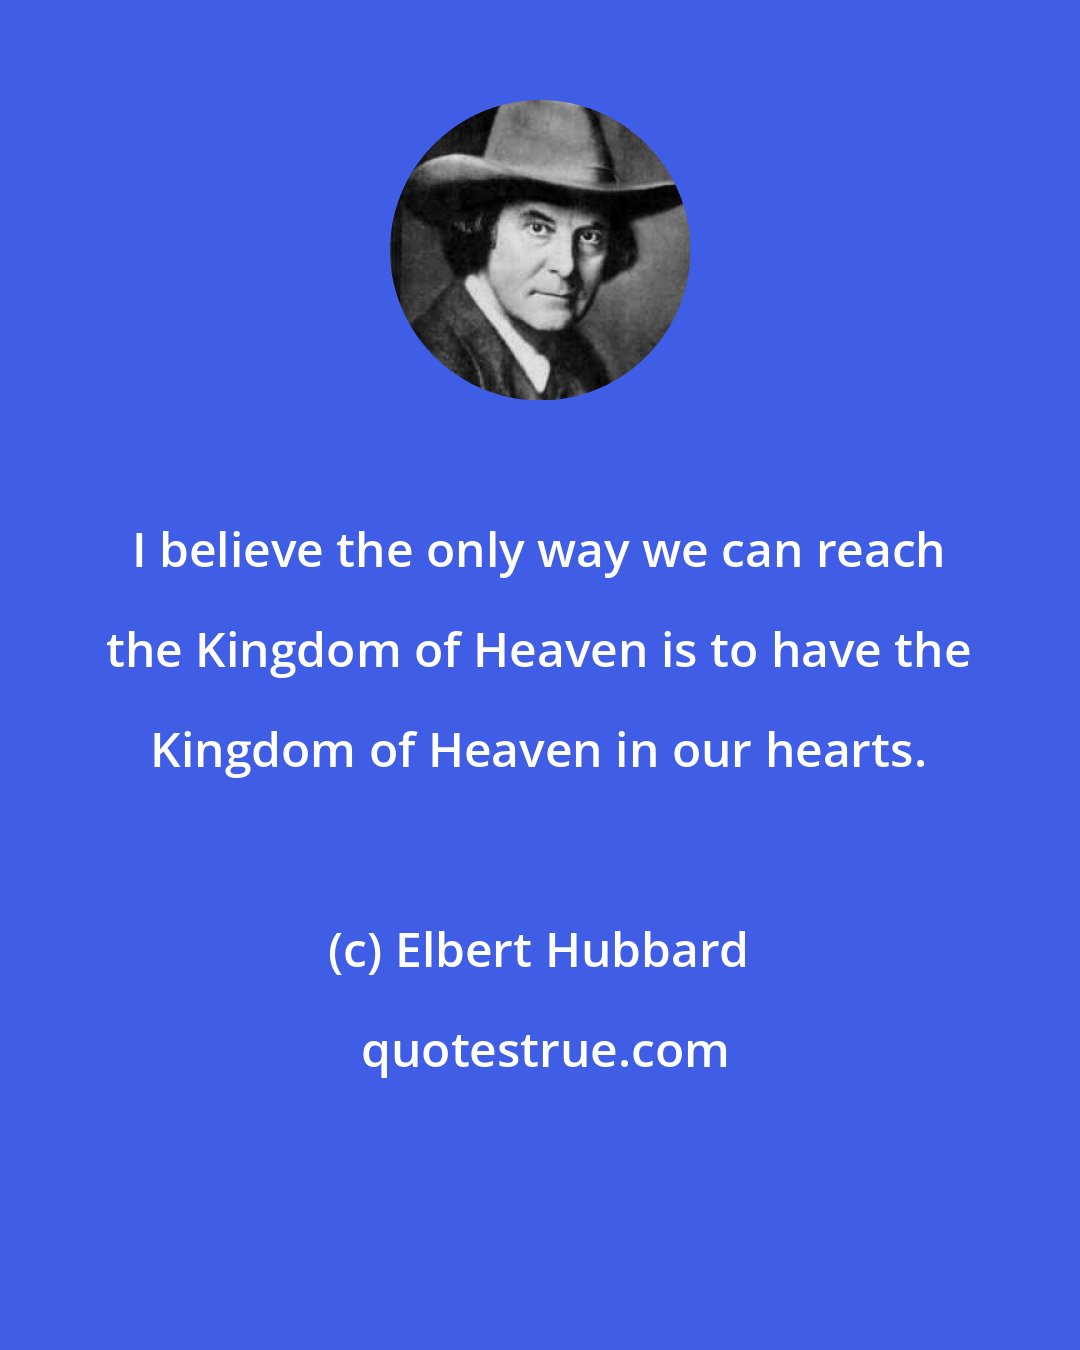 Elbert Hubbard: I believe the only way we can reach the Kingdom of Heaven is to have the Kingdom of Heaven in our hearts.